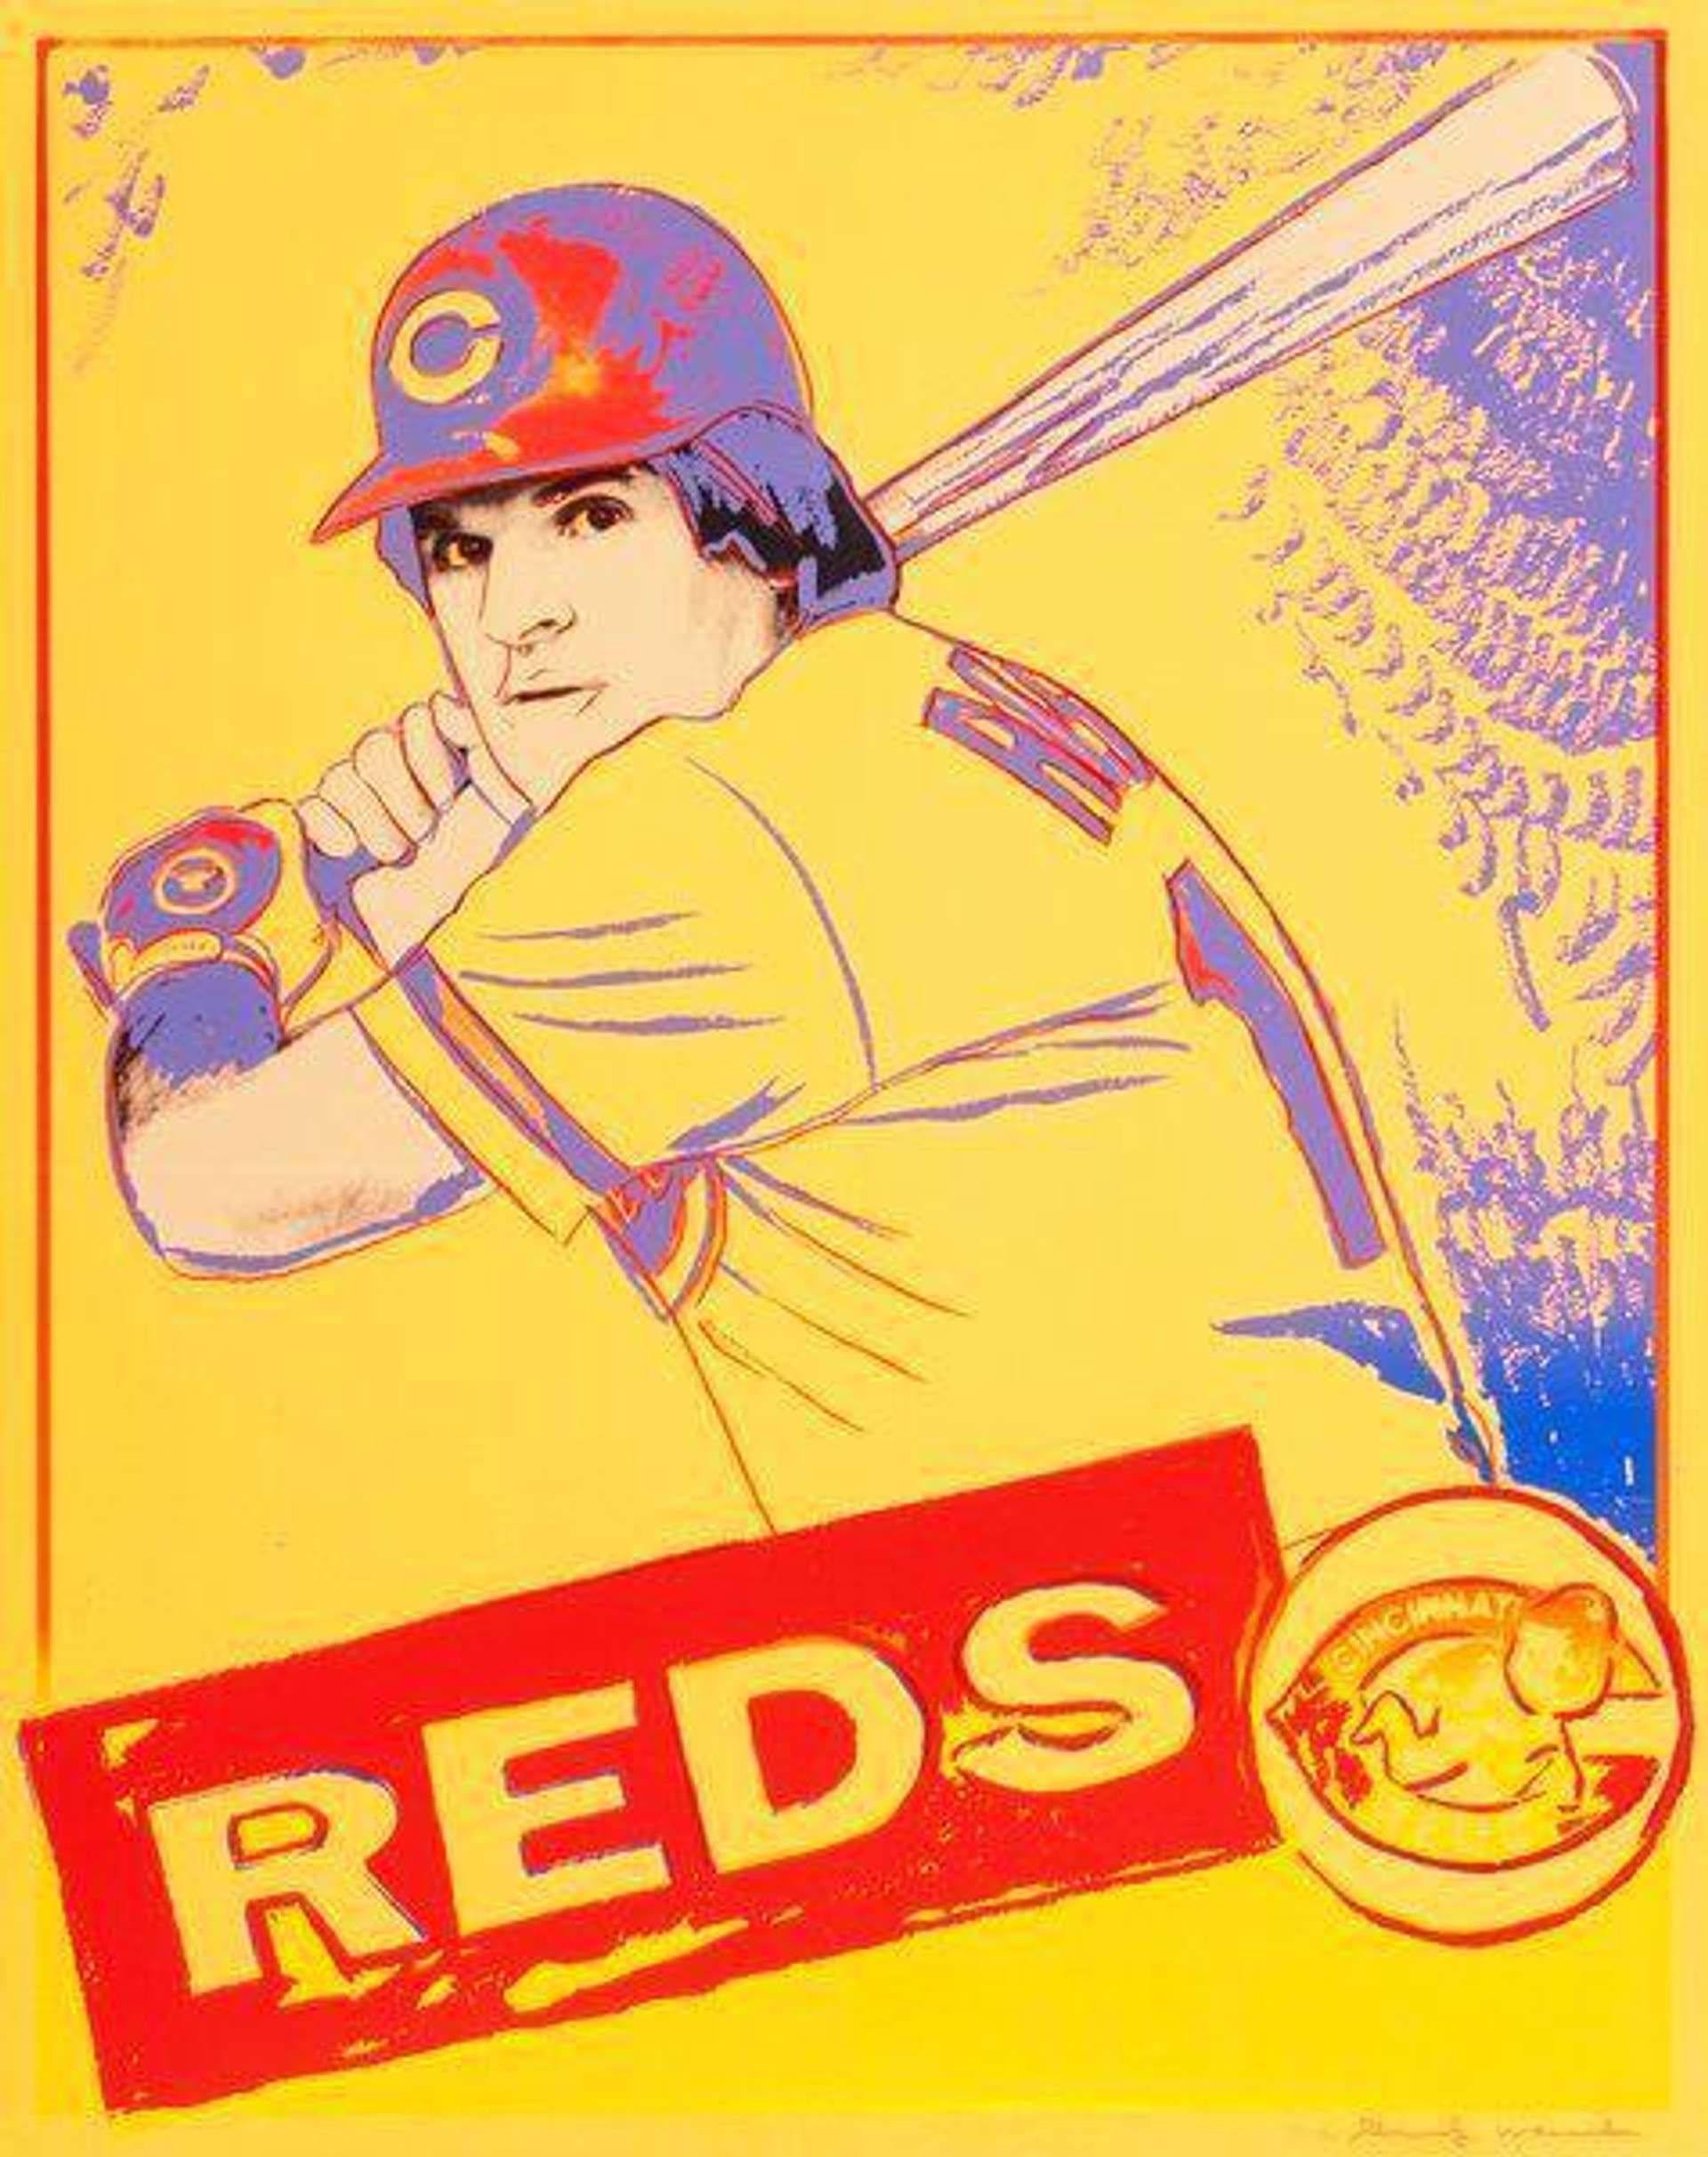 Andy Warhol: Pete Rose - Signed Print